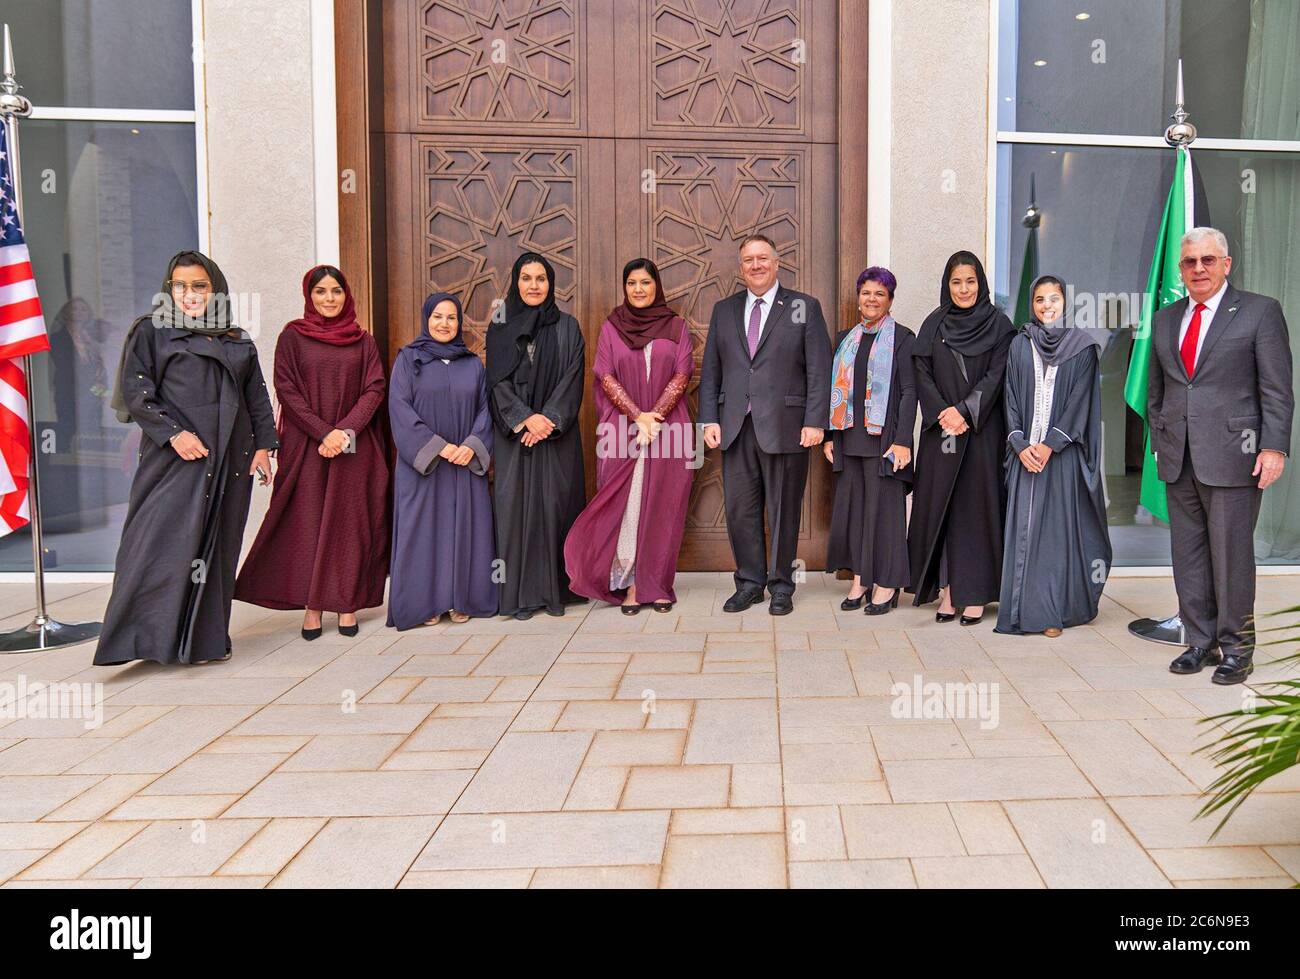 Secretary of State Mike Pompeo visiting Saudi Arabia - Secretary Pompeo Attends a Roundtable Coffee with Saudi Women Leaders ca. February 2020 Stock Photo